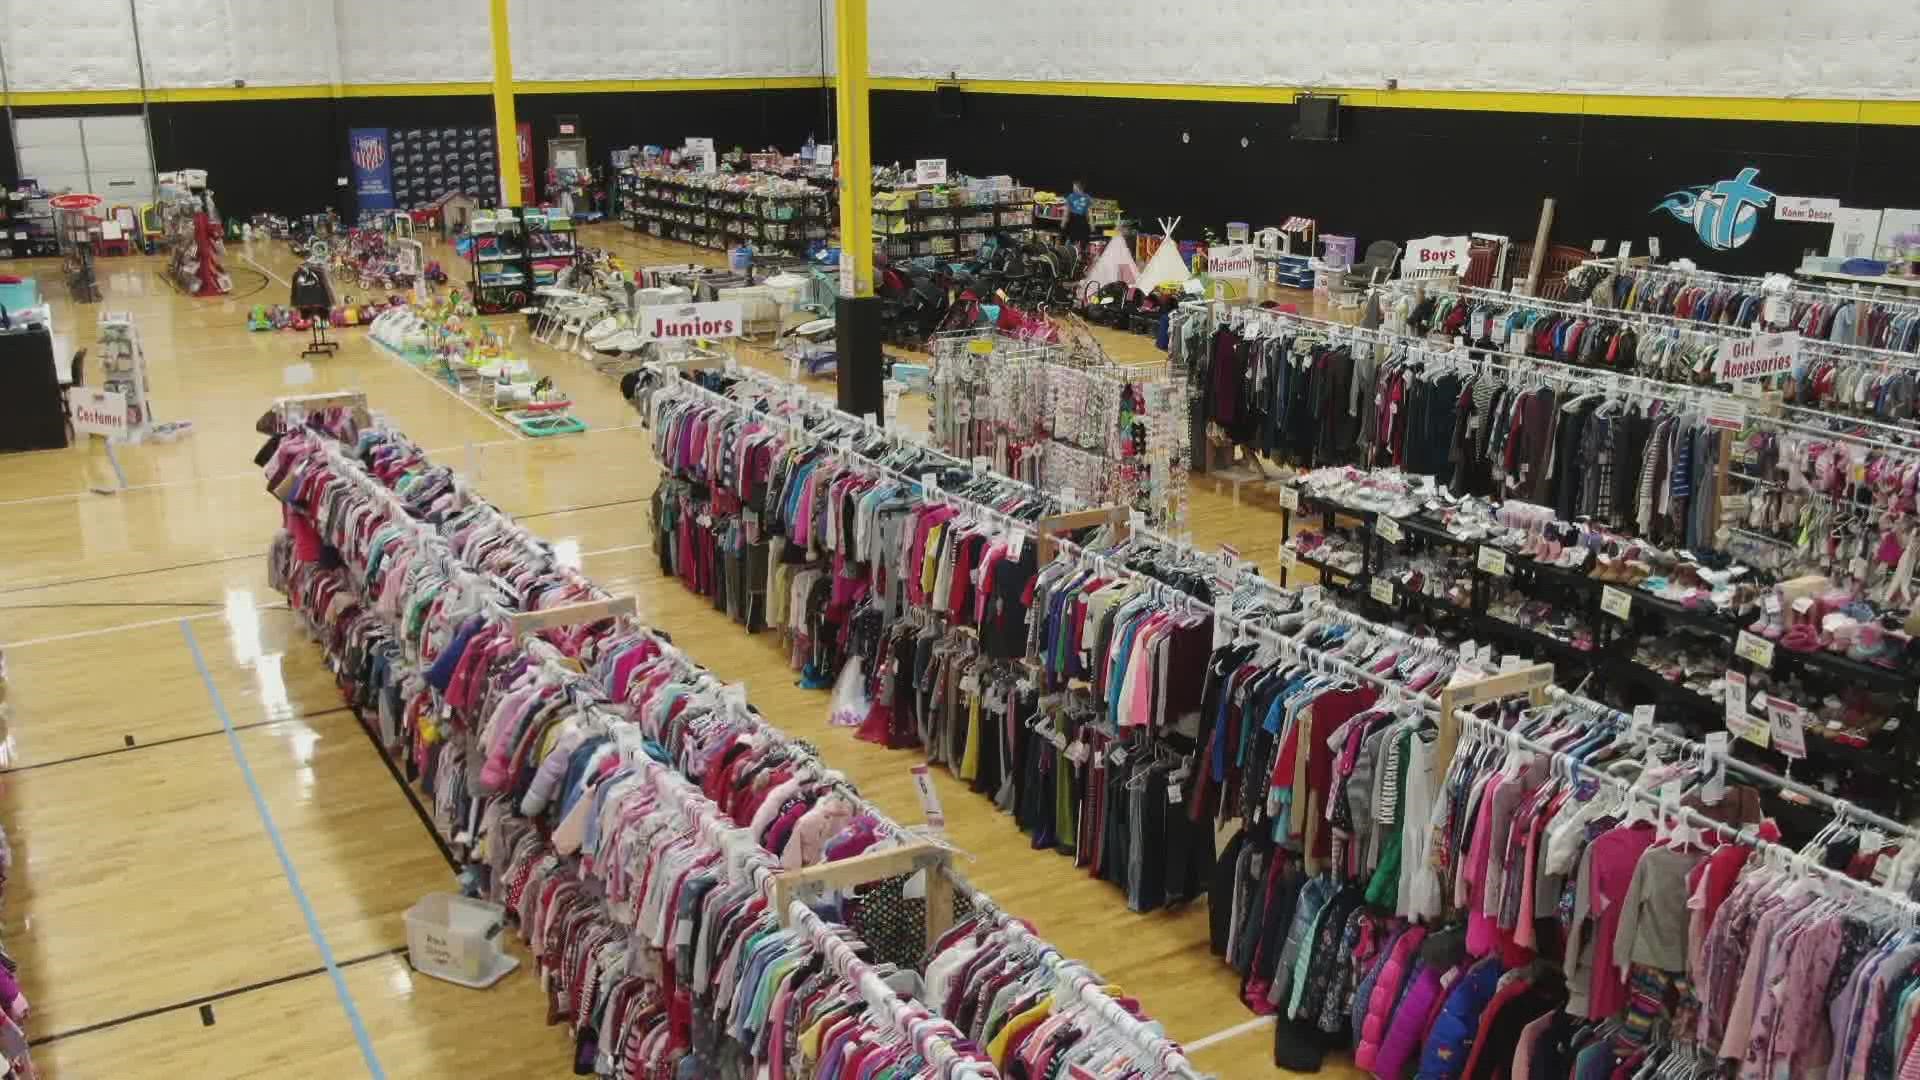 The bi-annual Just Between Friends consignment sale opens in South County as families struggle to make ends meet for the start of school.